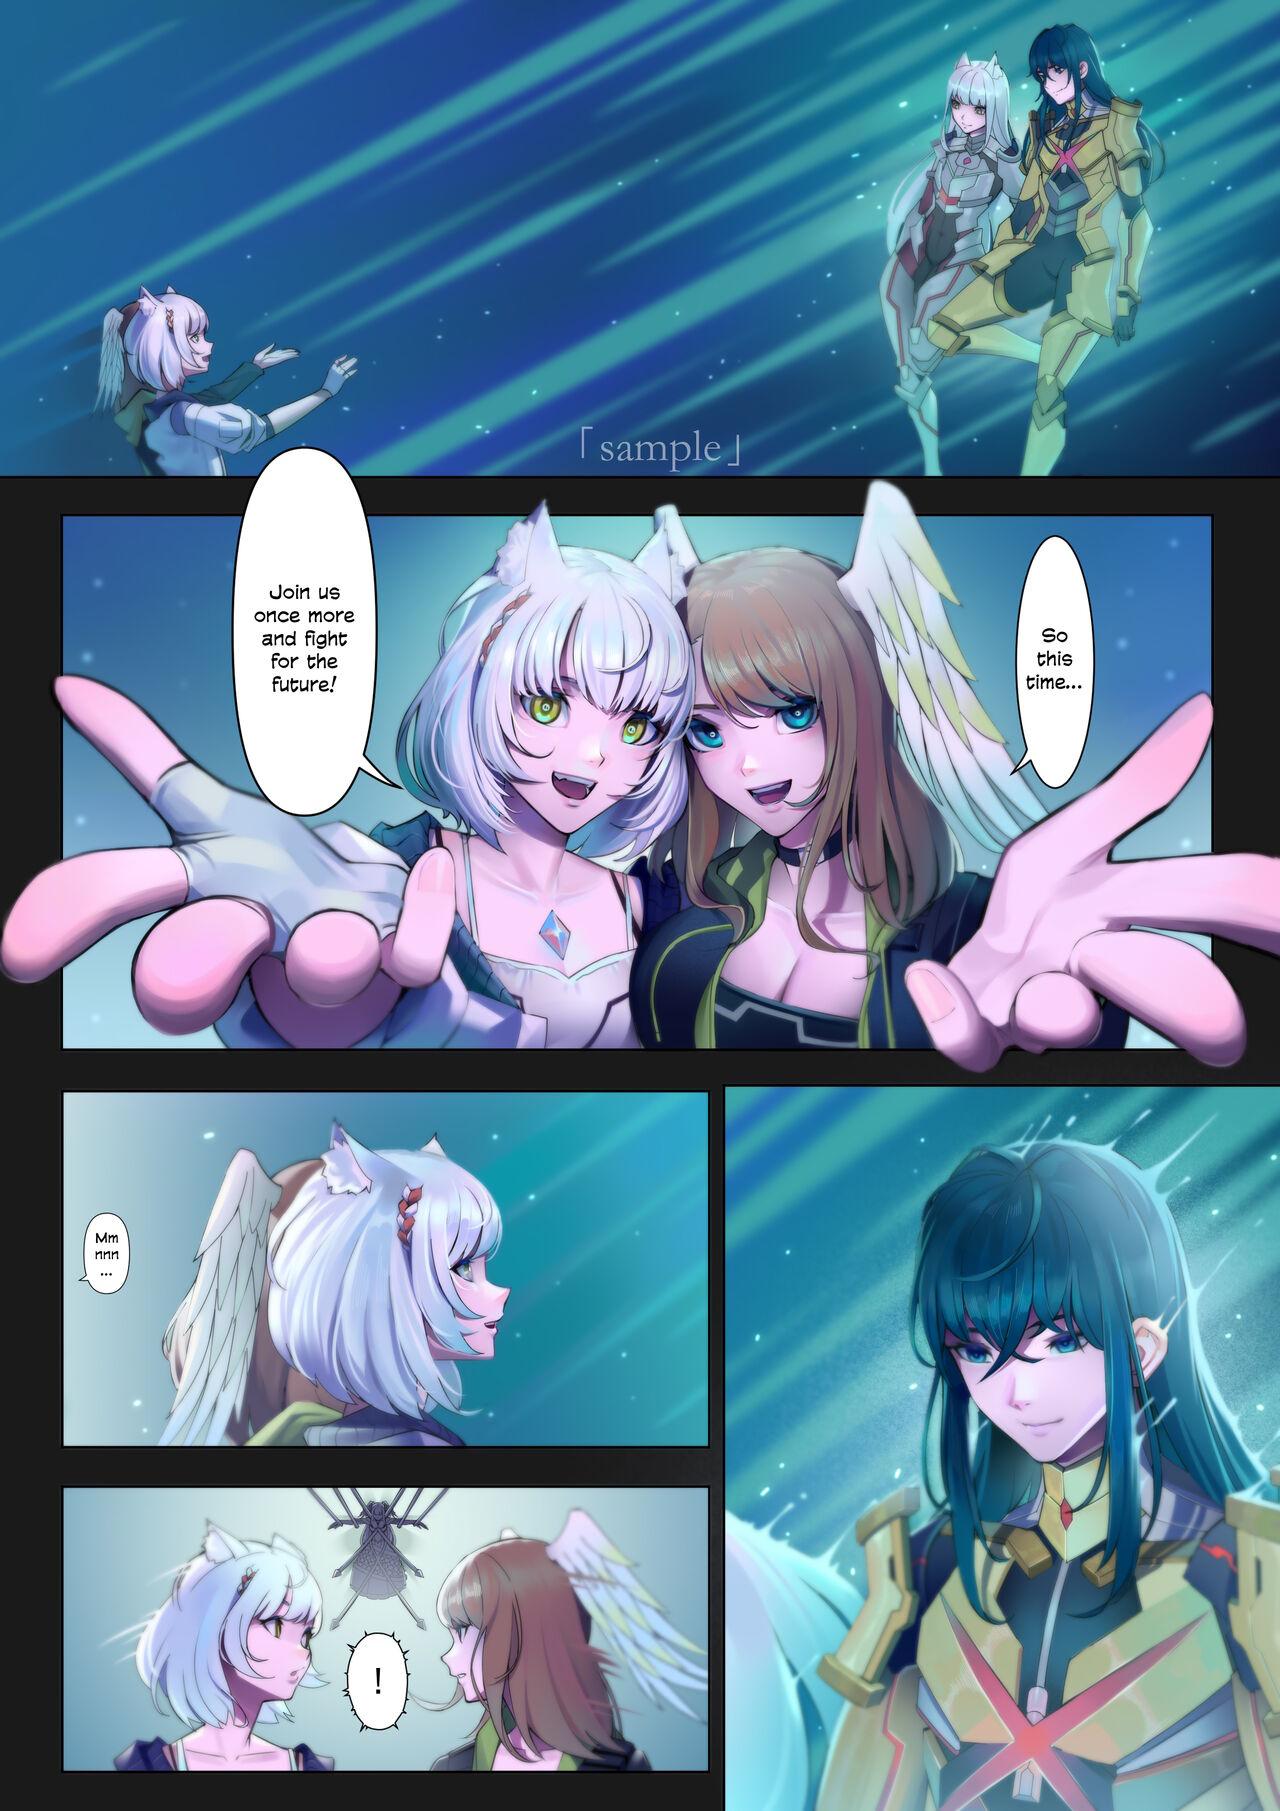 Stepmom 《Xe○blade3》Doujinshi Request - Xenoblade chronicles 3 Chilena - Page 3